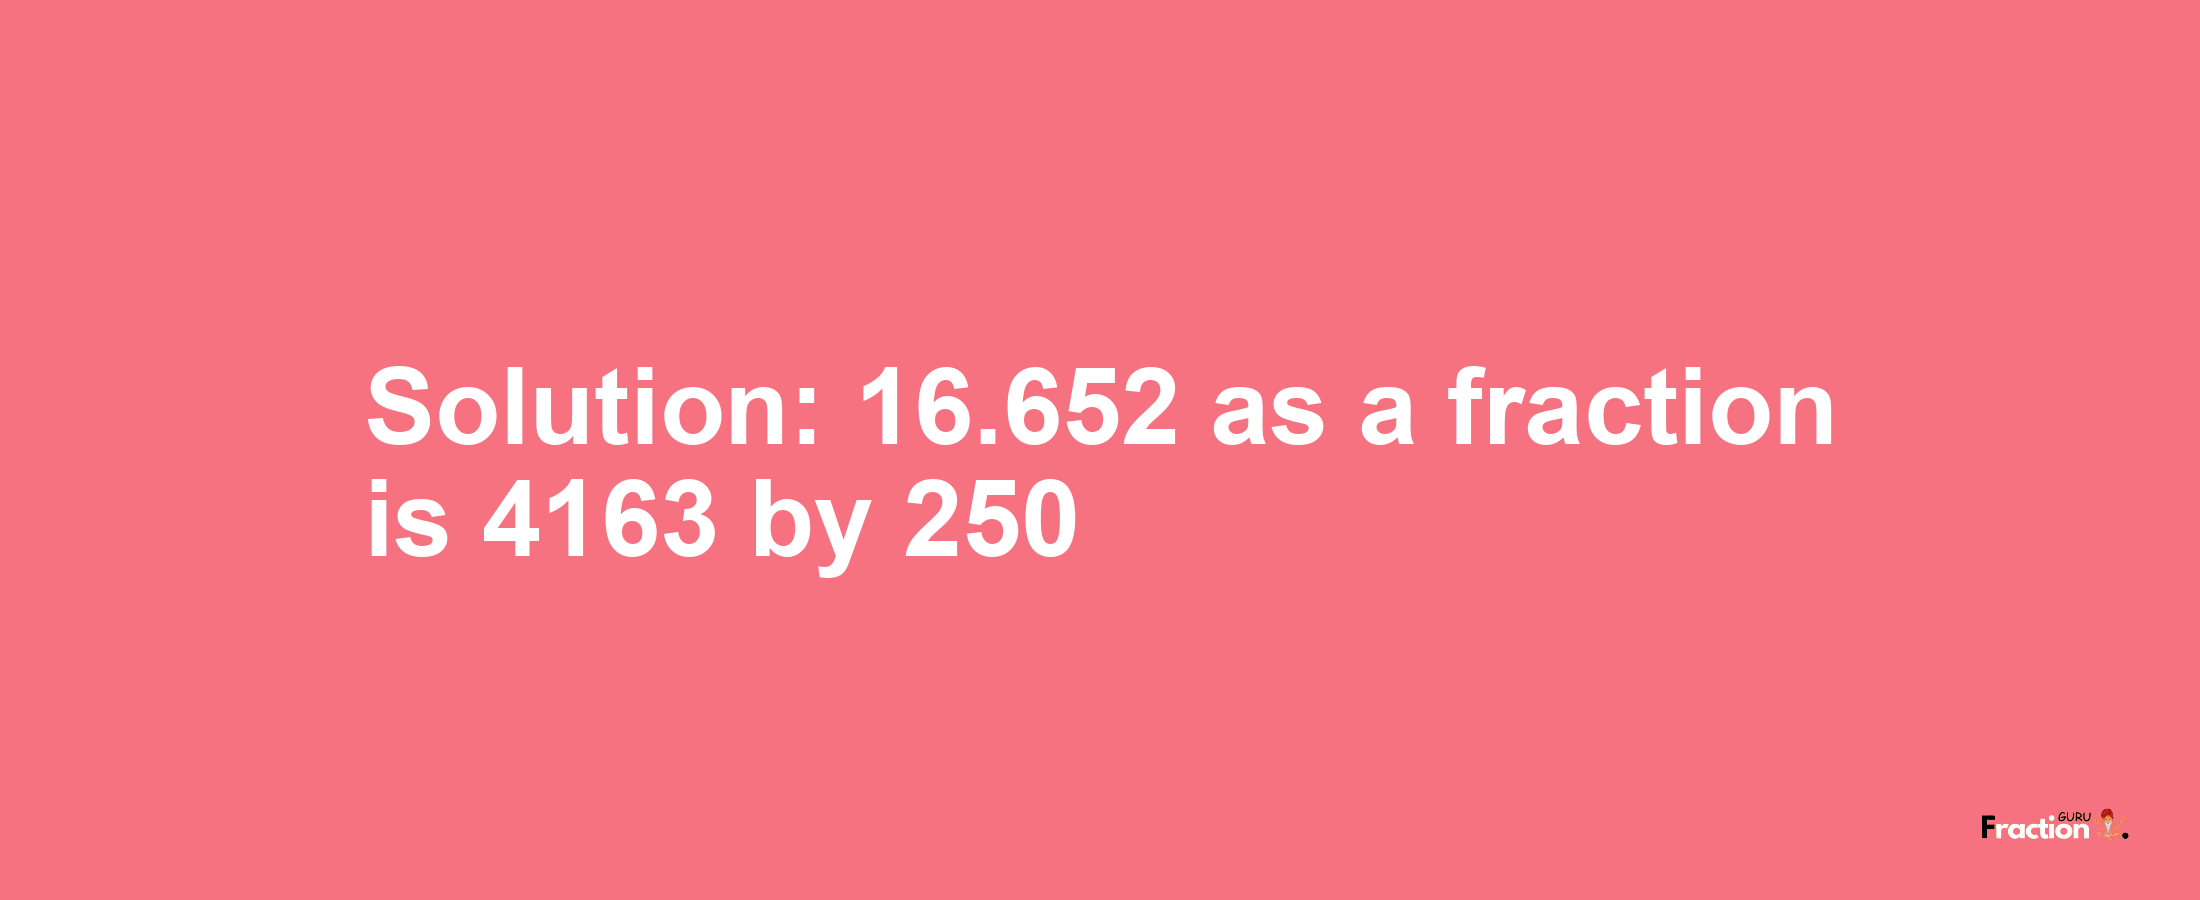 Solution:16.652 as a fraction is 4163/250